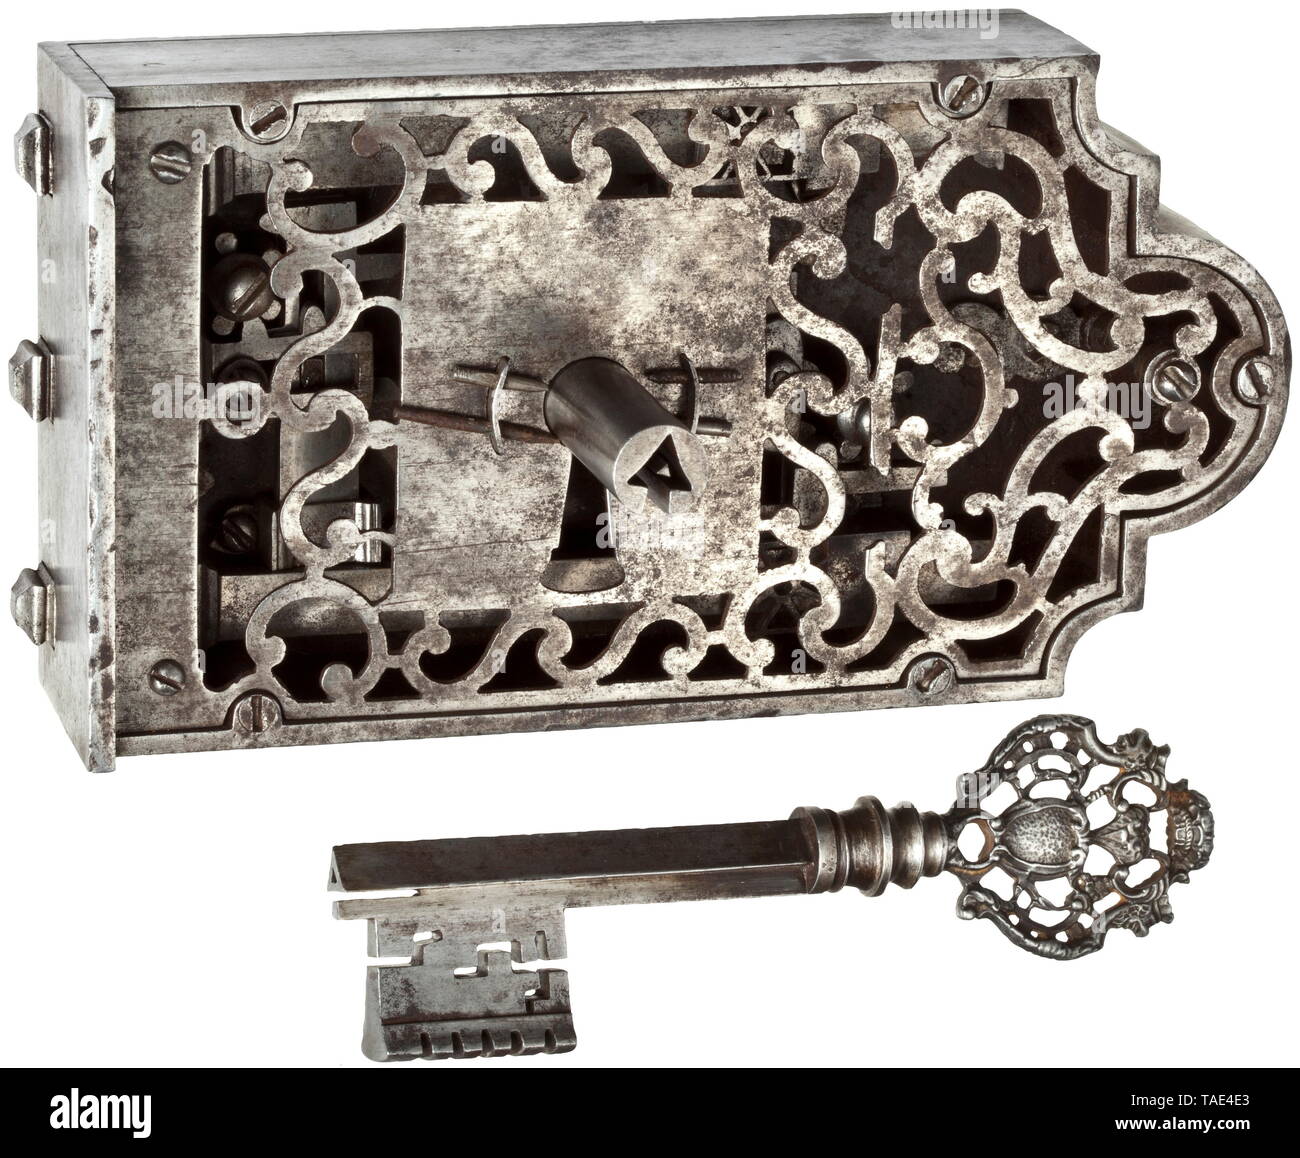 An intricate French lock, 17th century Wrought iron. The lock mechanism with three cut locking bolts, each of which can be moved individually by a complicated system of wheels and pins. Openwork interior fittings, smooth exterior surface with ornamental bosses and openwork front plate. Comes with a matching key. Dimensions 103 x 195 x 80 mm. Finely worked lock of superior quality. historic, historical, handicrafts, handcraft, craft, object, objects, stills, clipping, clippings, cut out, cut-out, cut-outs, 17th century, Additional-Rights-Clearance-Info-Not-Available Stock Photo